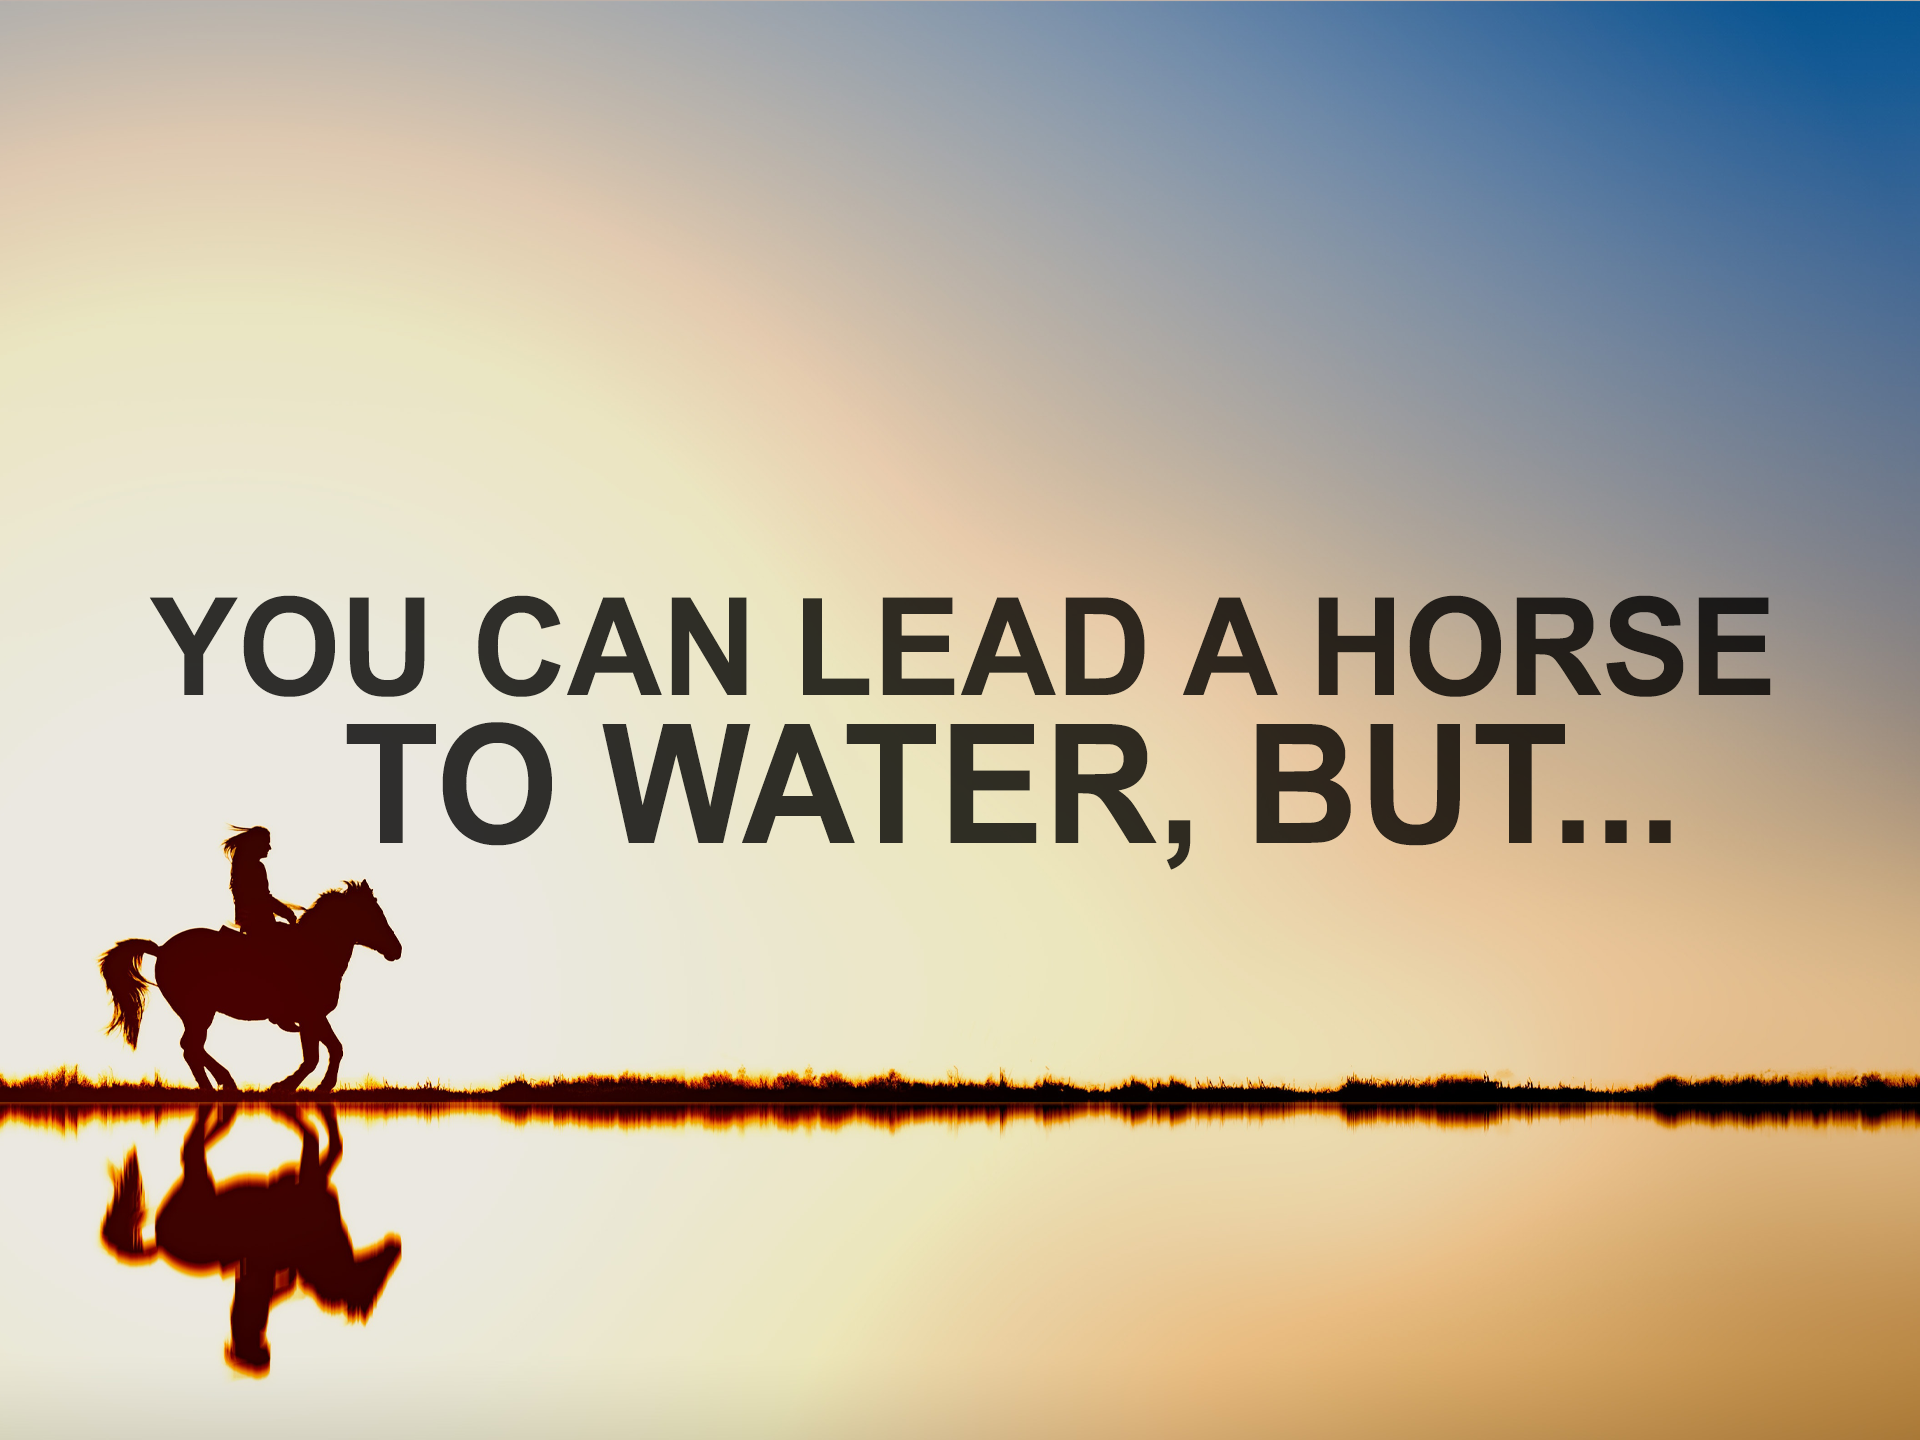 030319+You+can+lead+a+horse+to+water+but.png